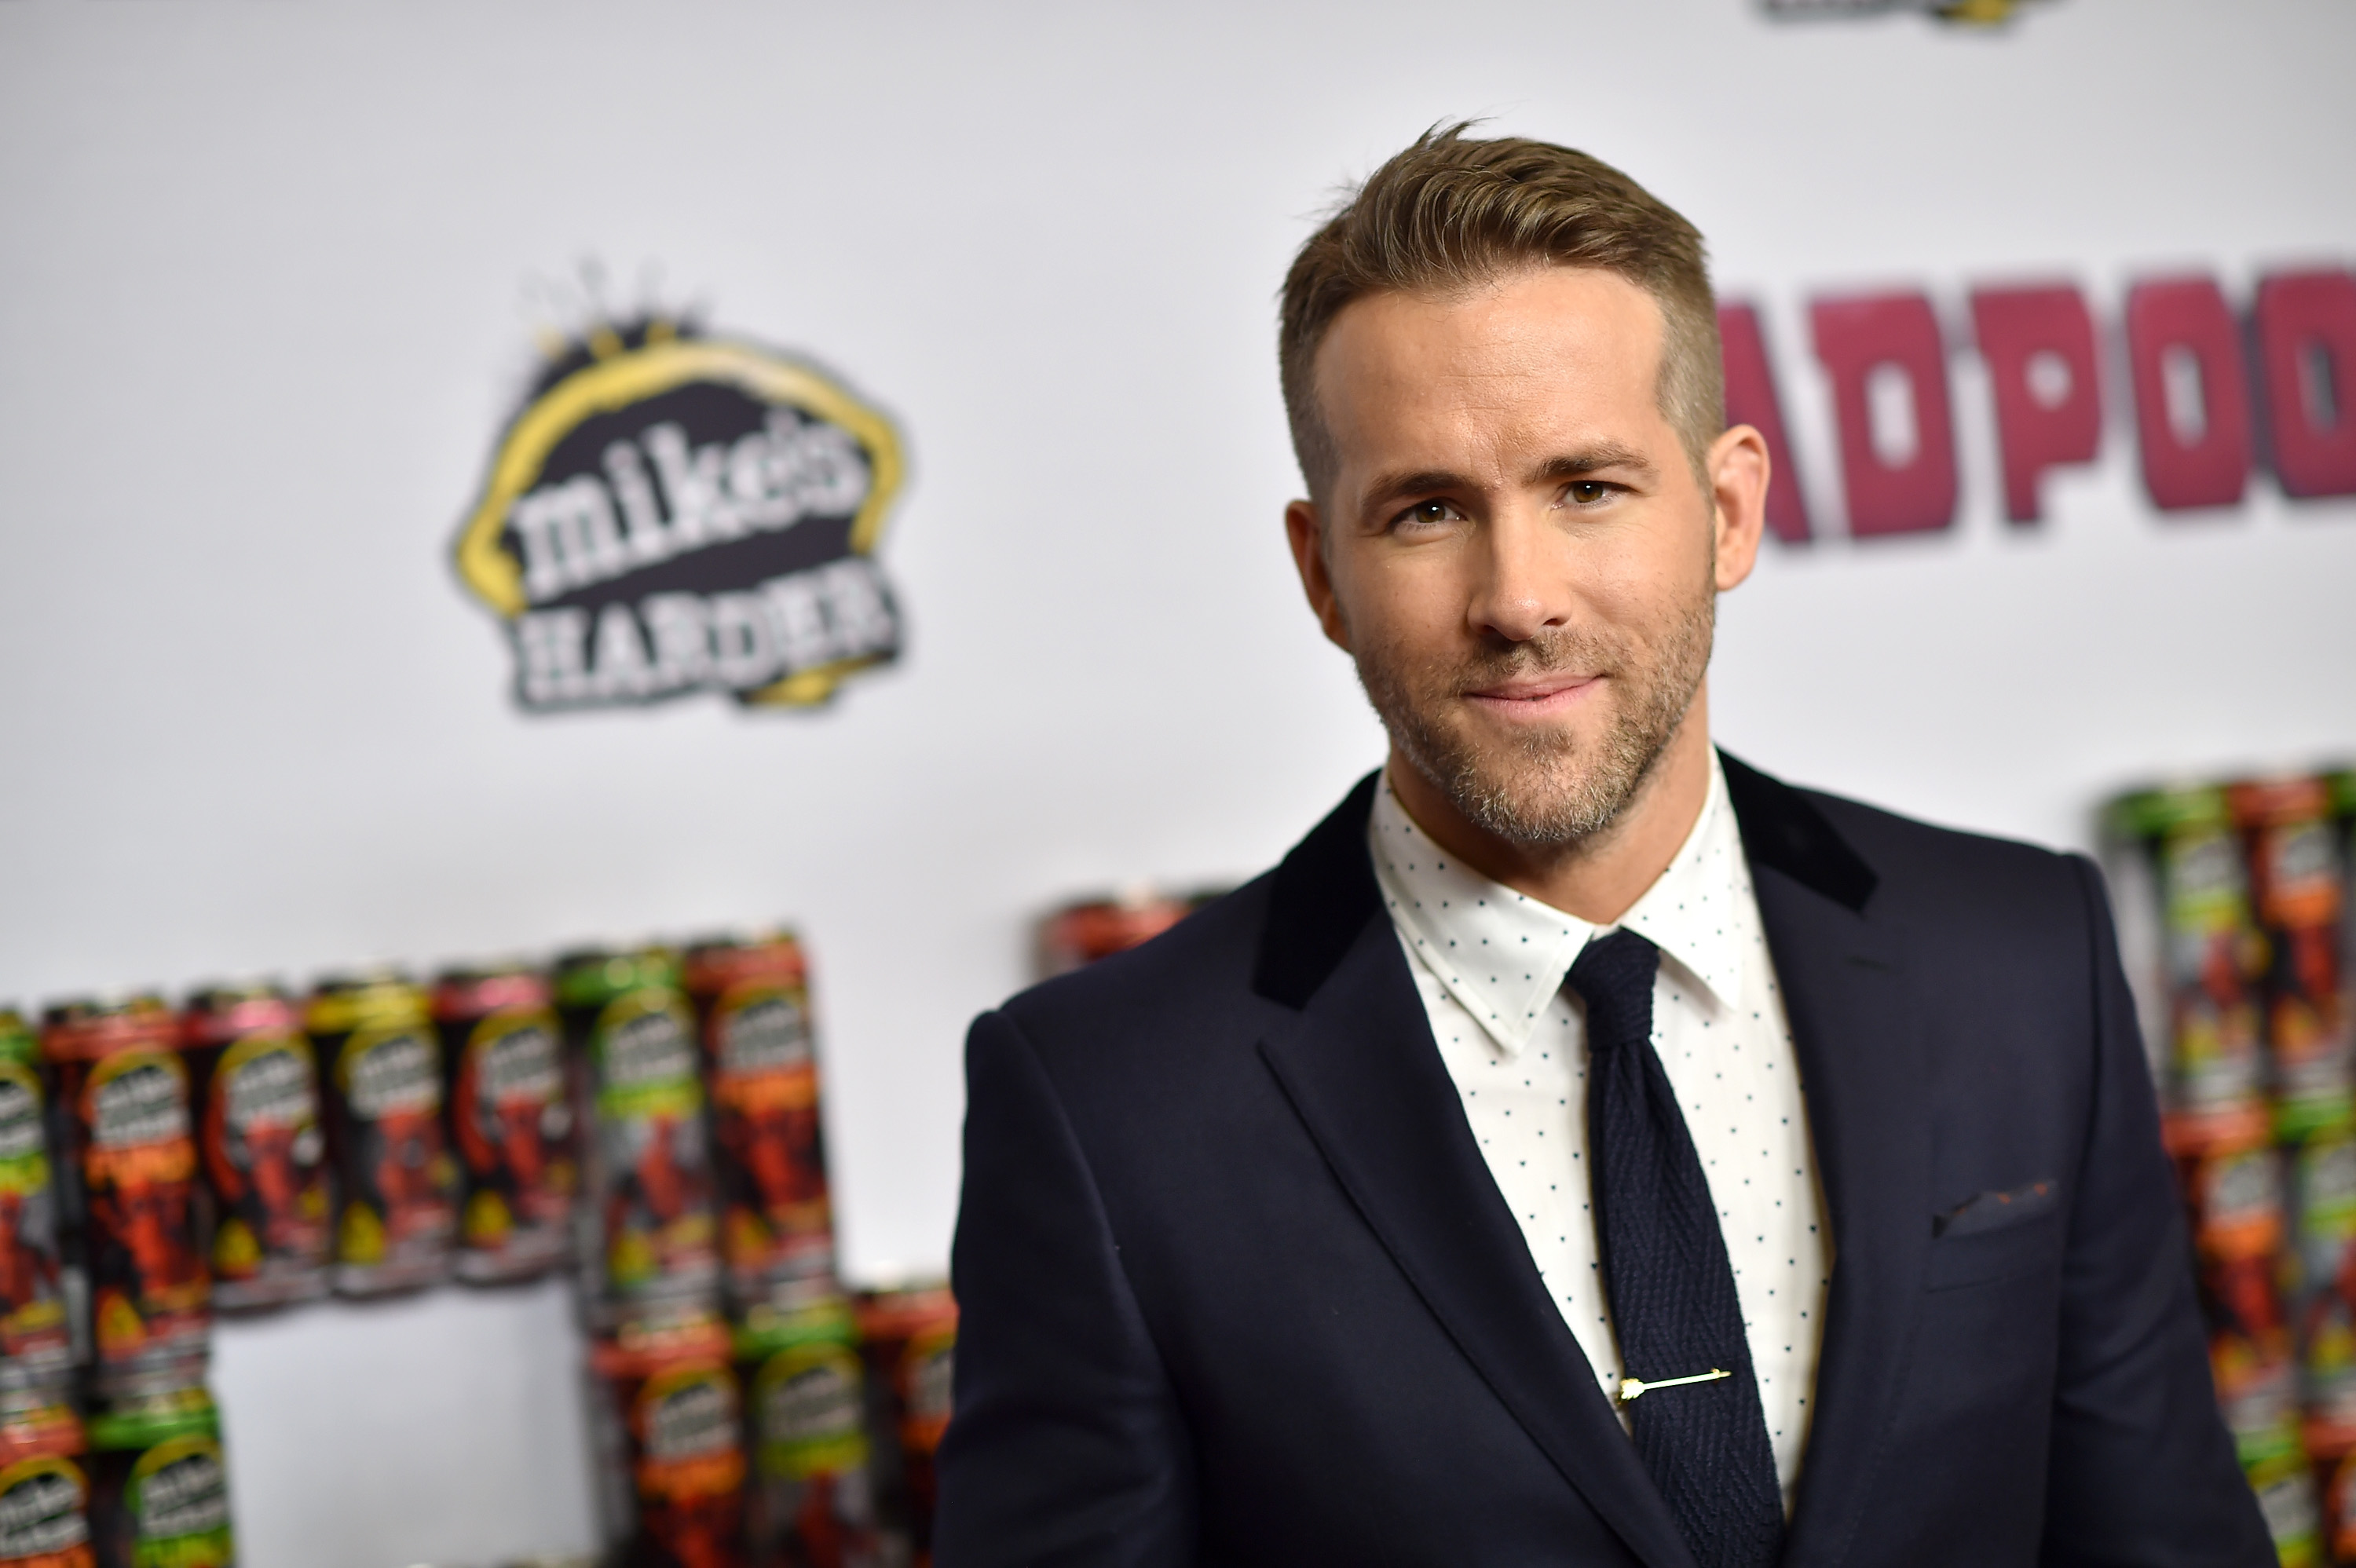 Actor Ryan Reynolds attends the 'Deadpool' fan event at AMC Empire Theatre on February 8, 2016, in New York City. (Dimitrios Kambouris—Getty Images)